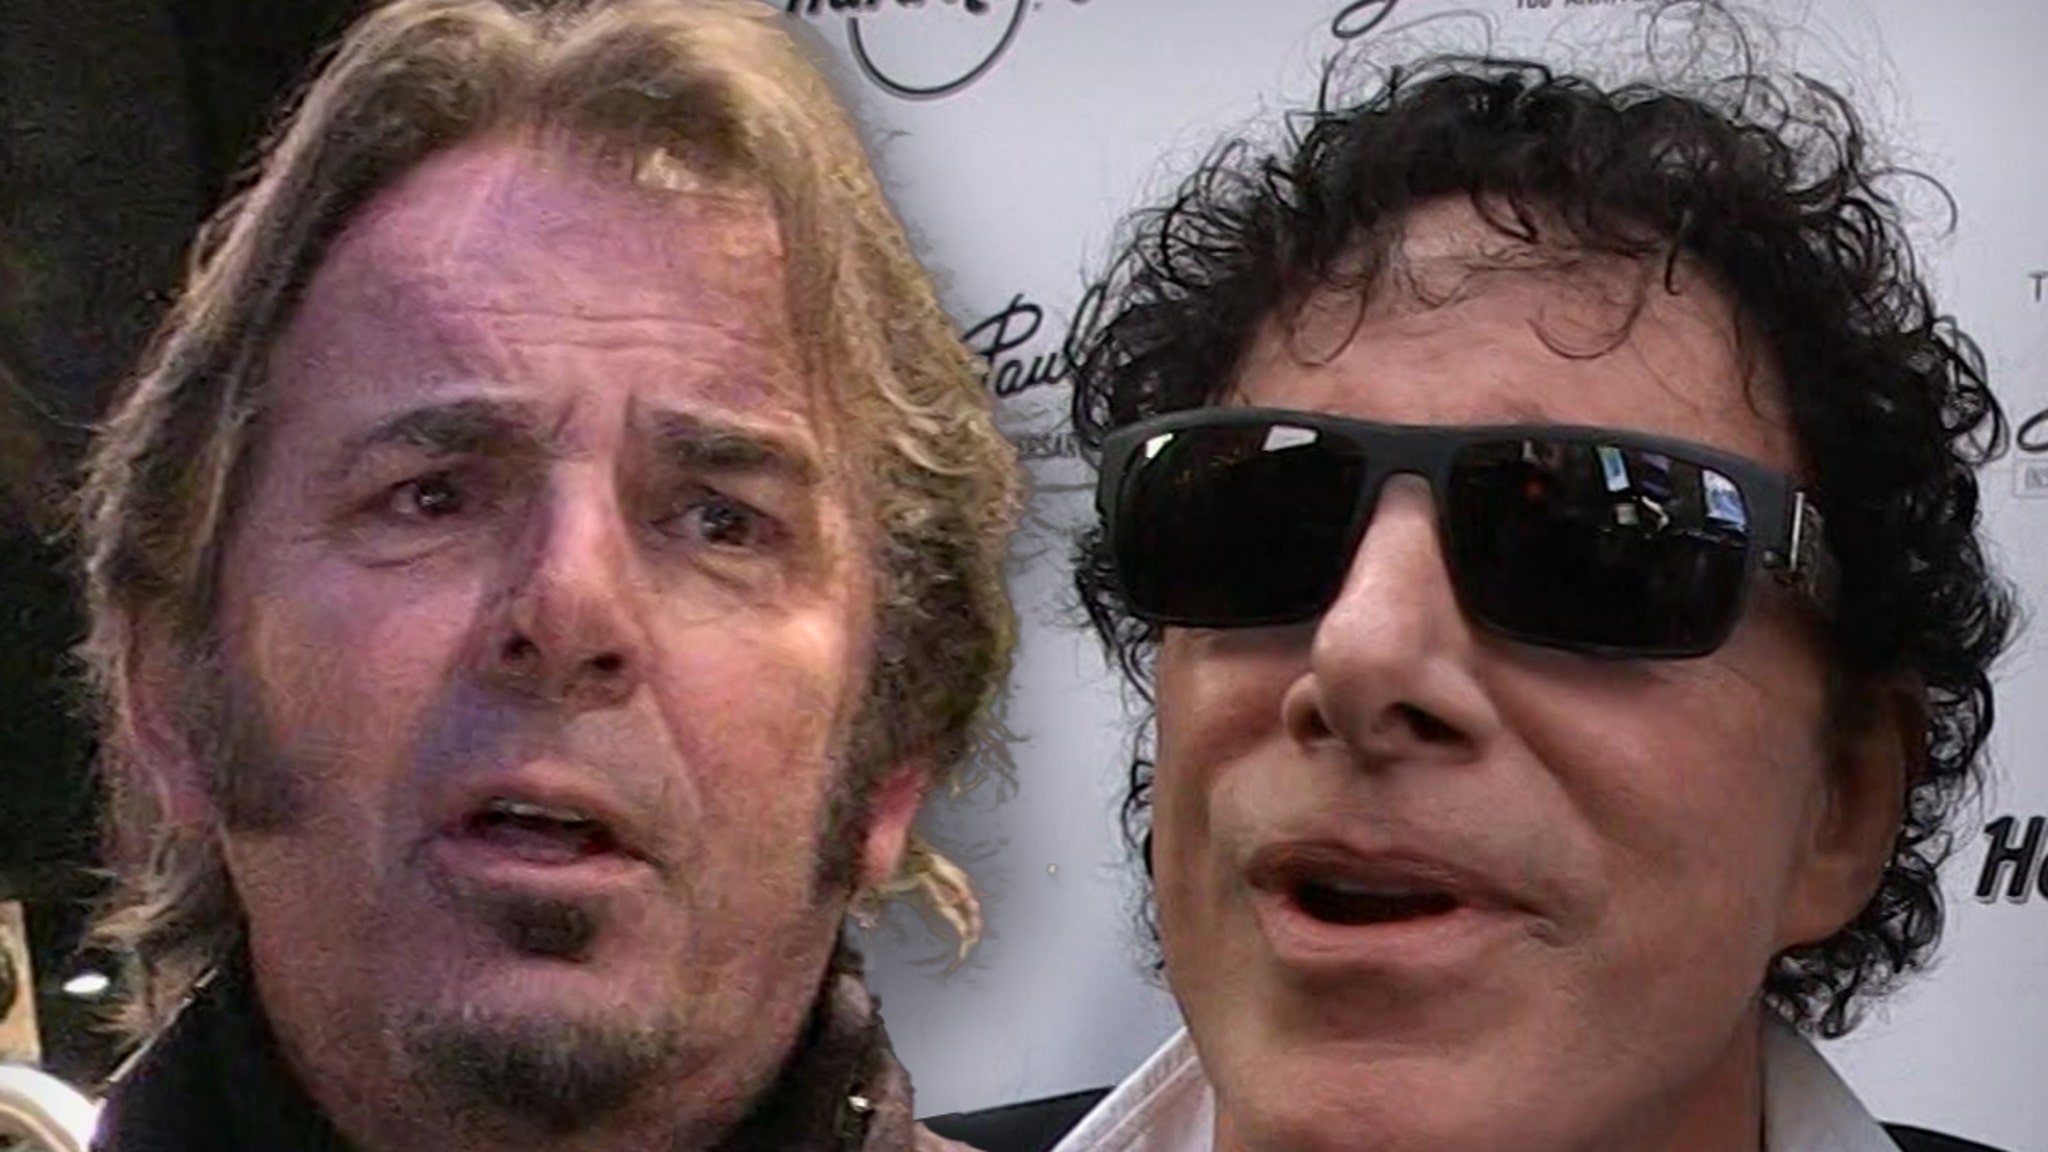 Journey's Jonathan Cain Says Neal Schon Lost AMEX Access Over Reckless Spending